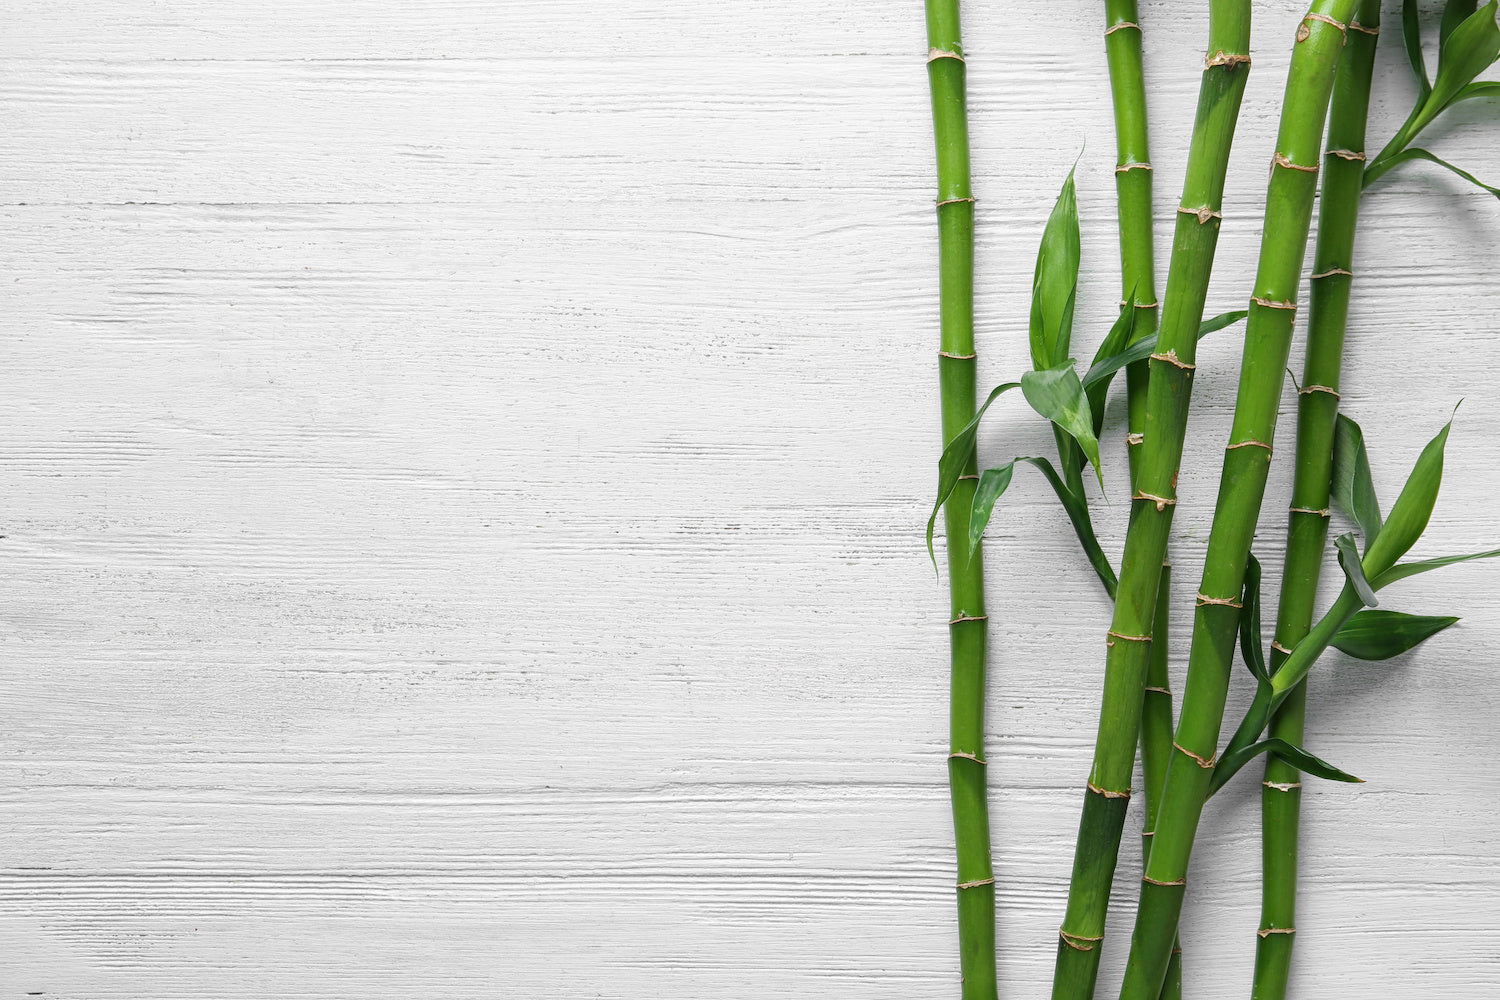 White wood background with bamboo.